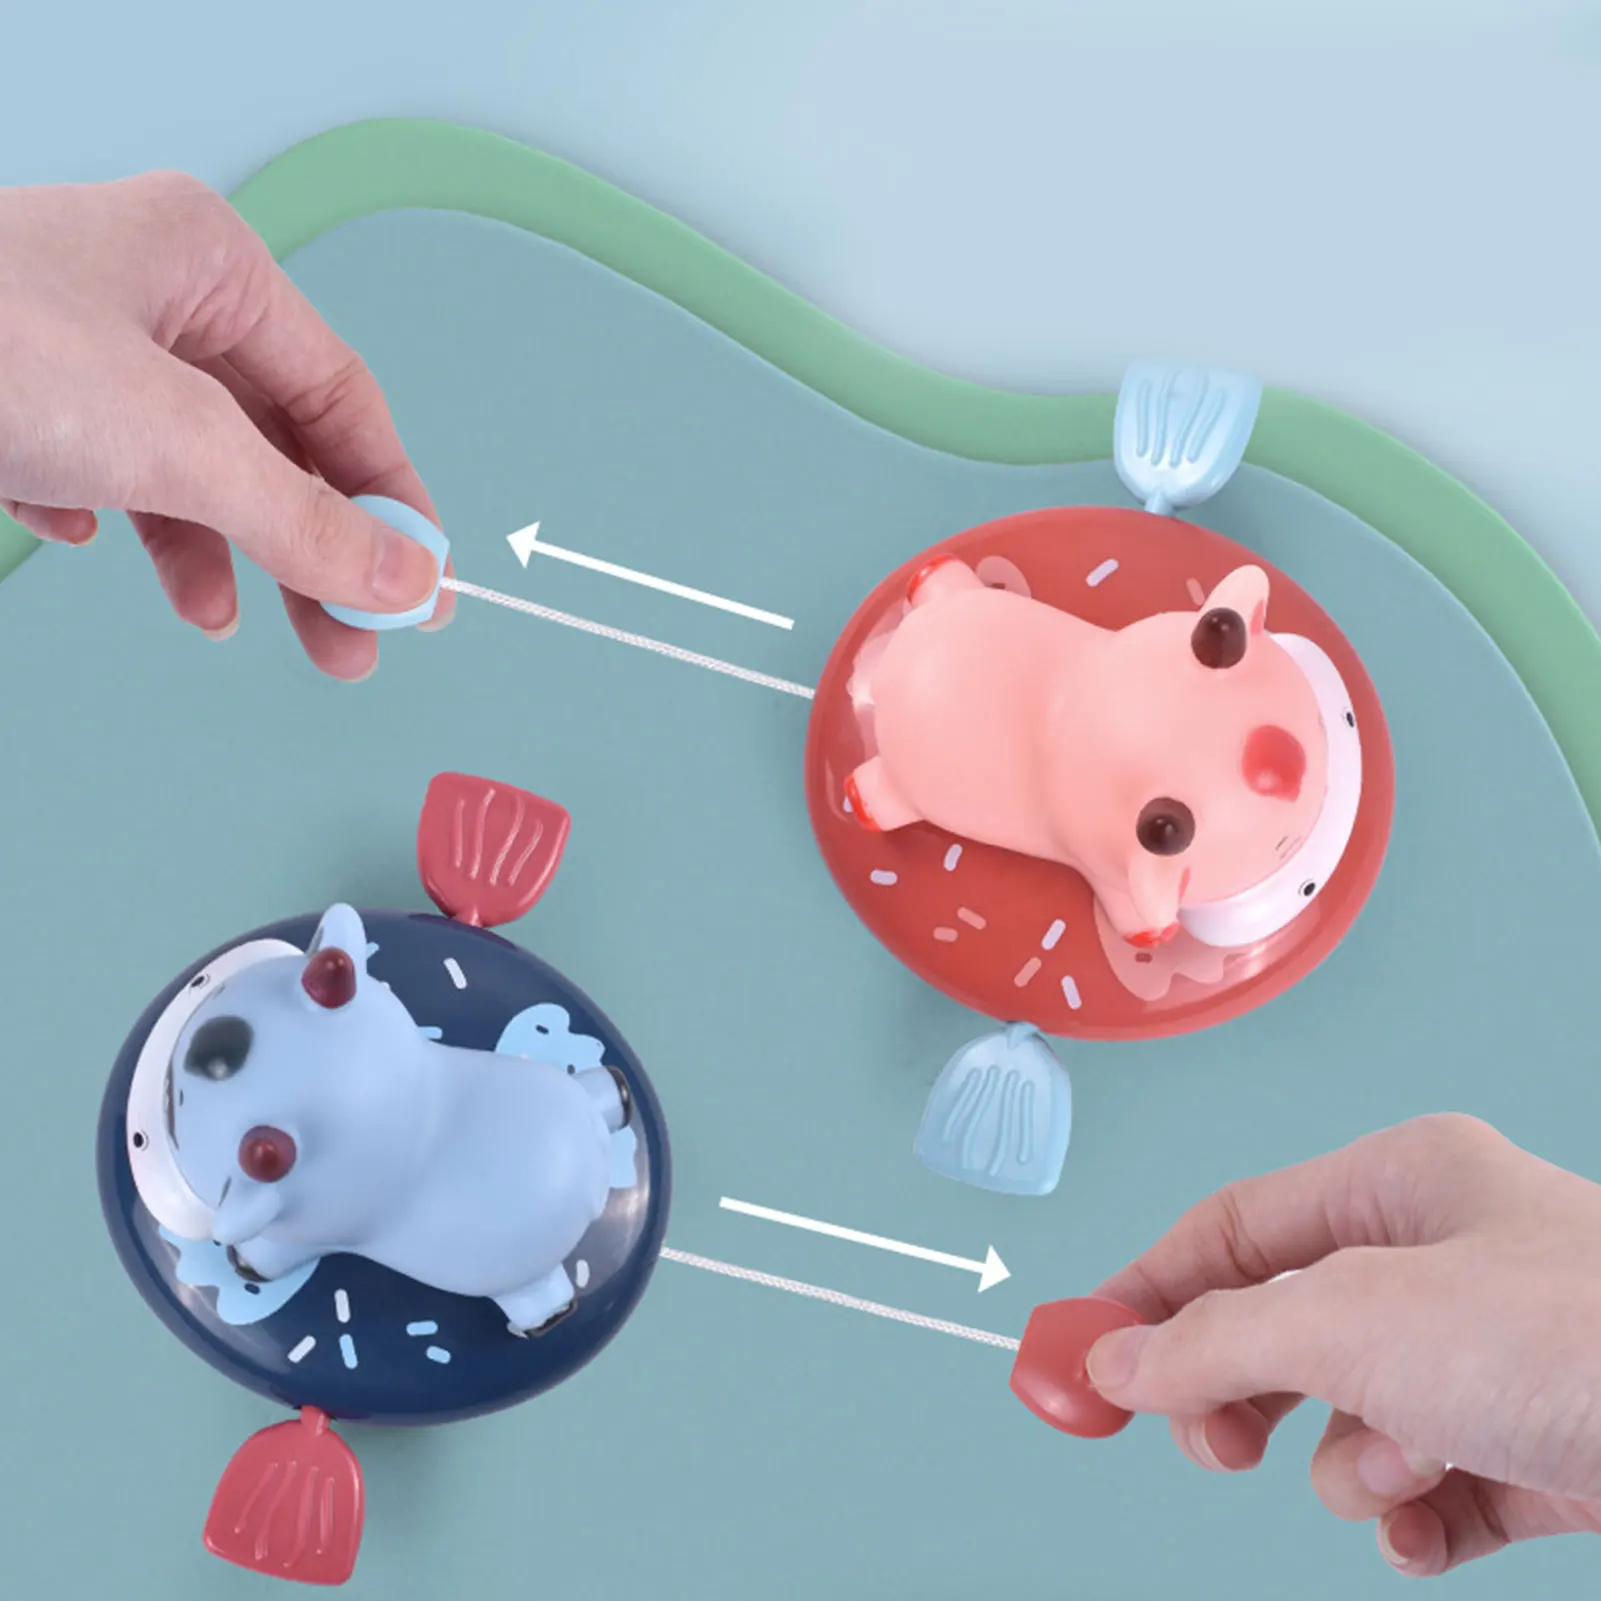 

Cow Bath Floating Toy Water Squirting Bath Toy For Toddlers Kids Cute Farm Animal Toy Water Jet Toy For Bathtub Beach Pool